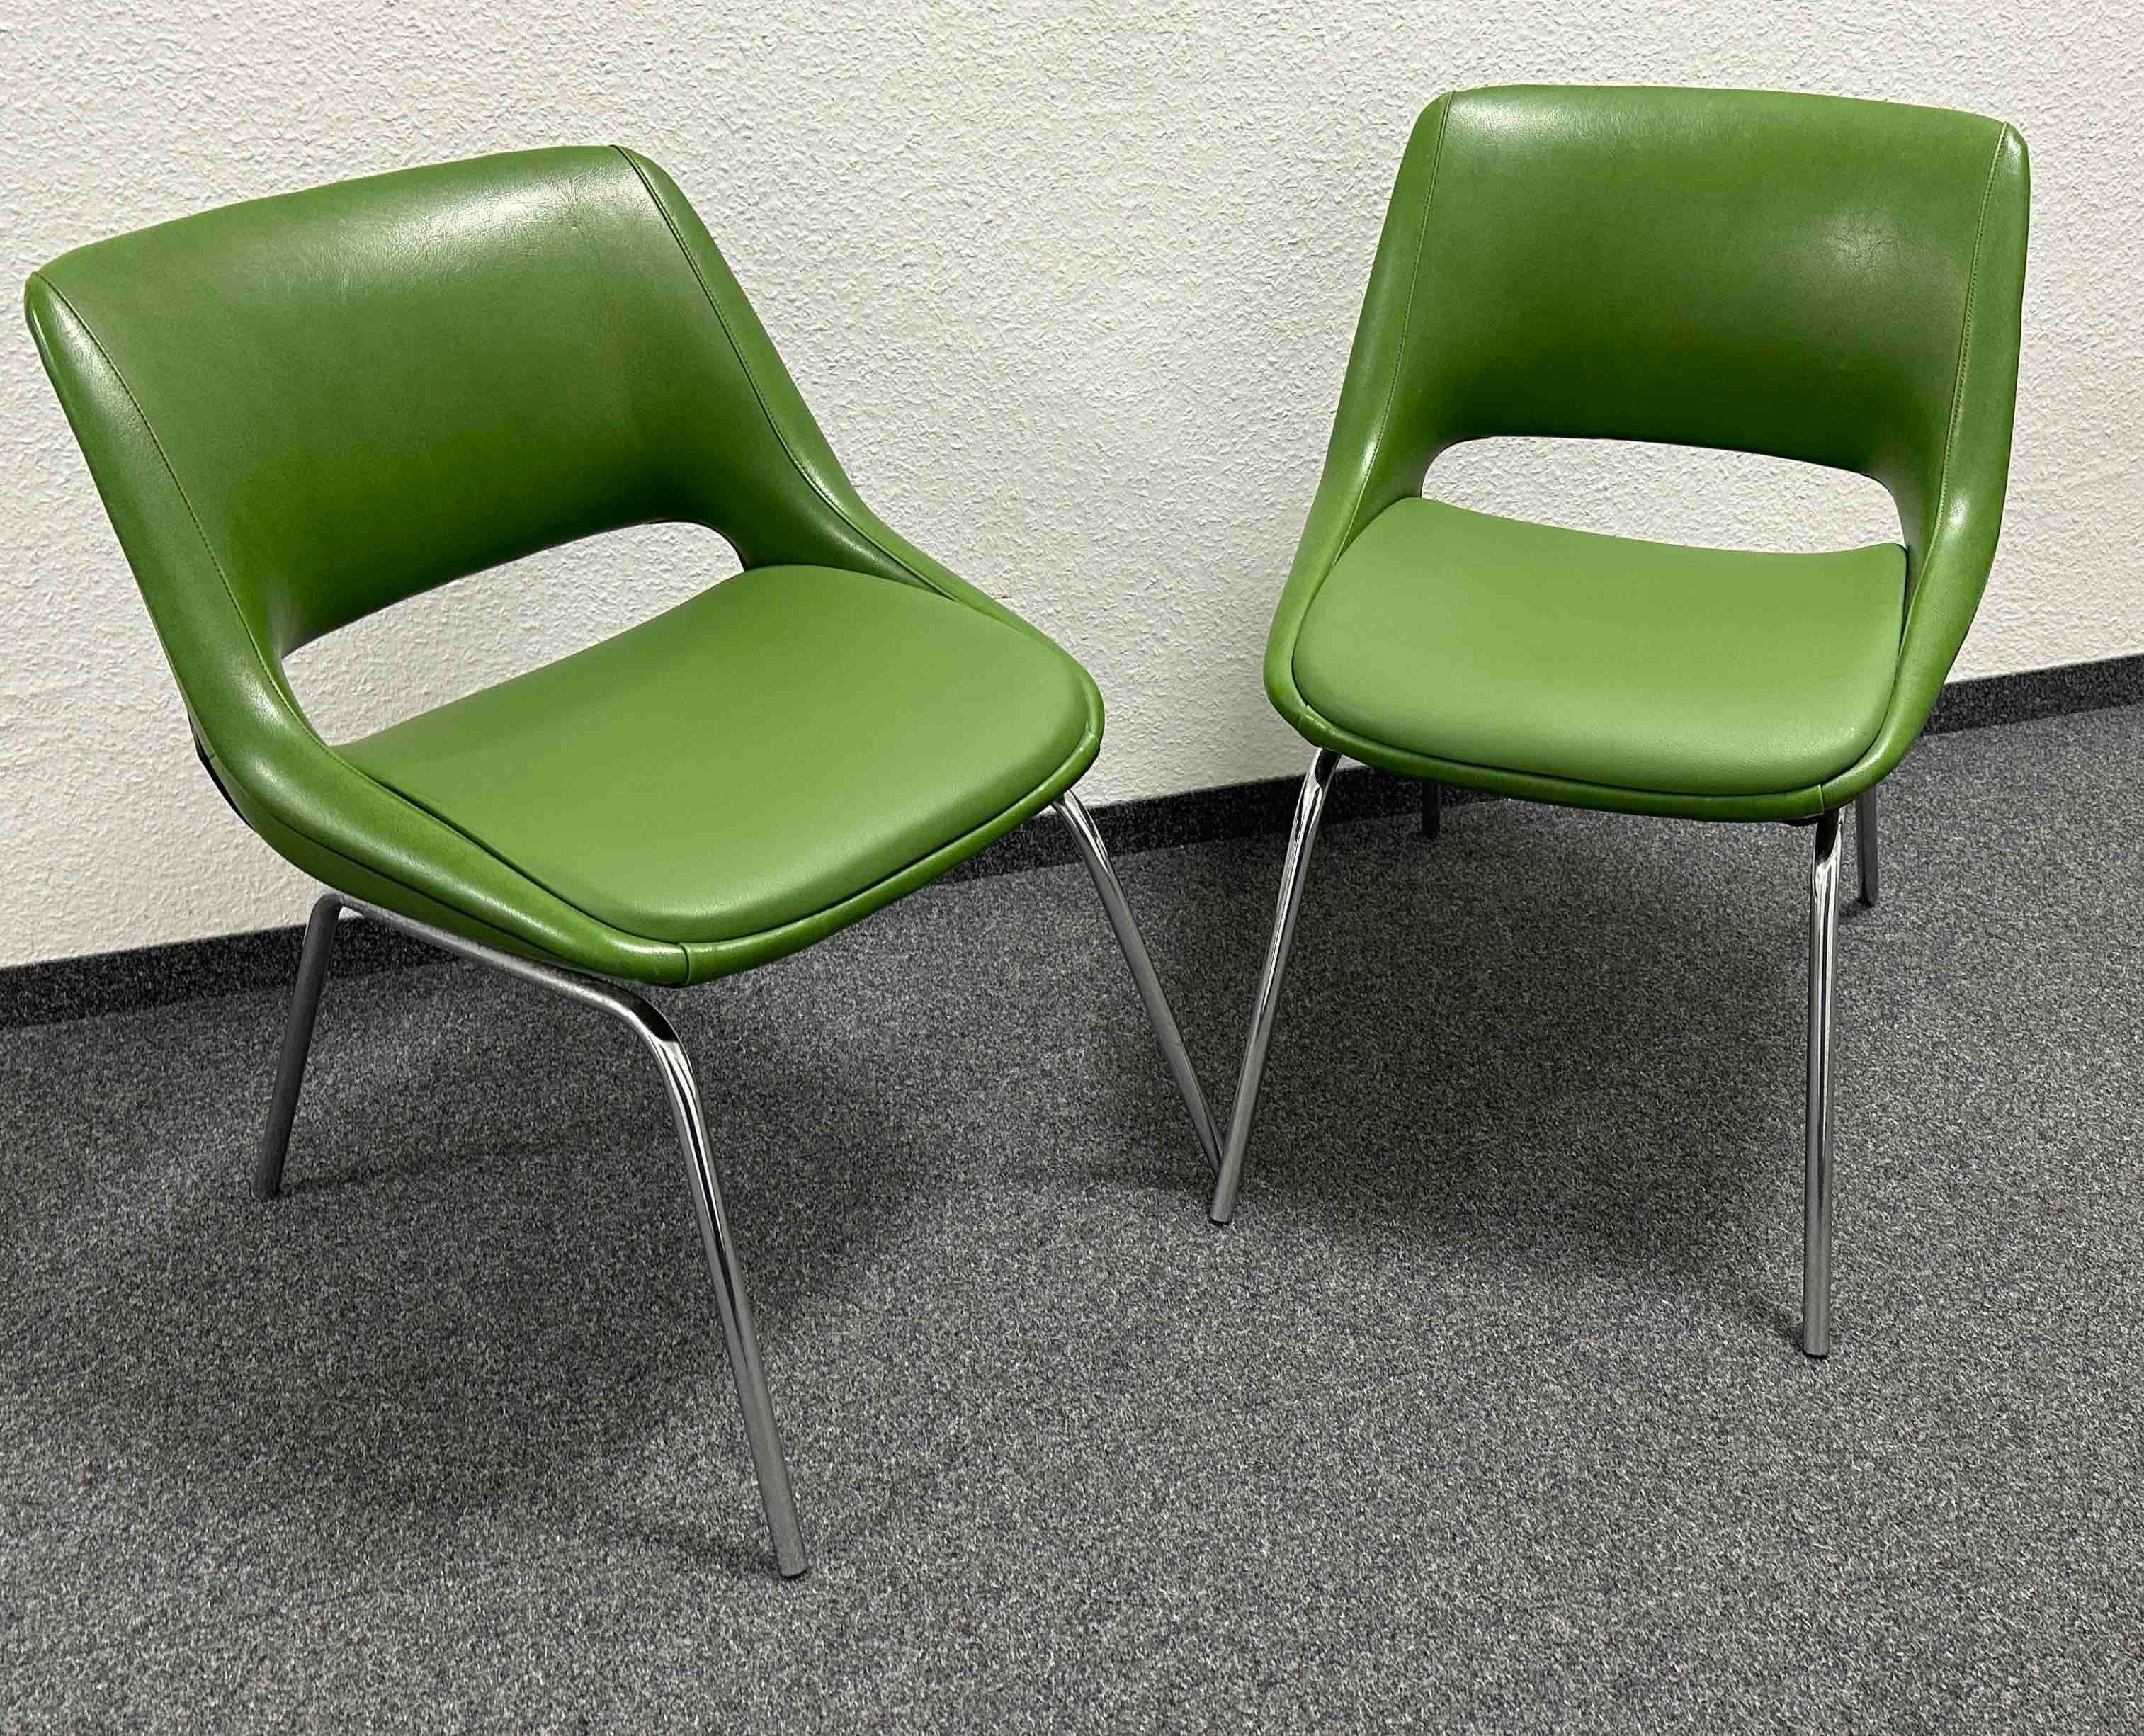 Two Chrome Base, Green Faux Leather Chairs Made by Blaha, Austria, 1970s For Sale 6